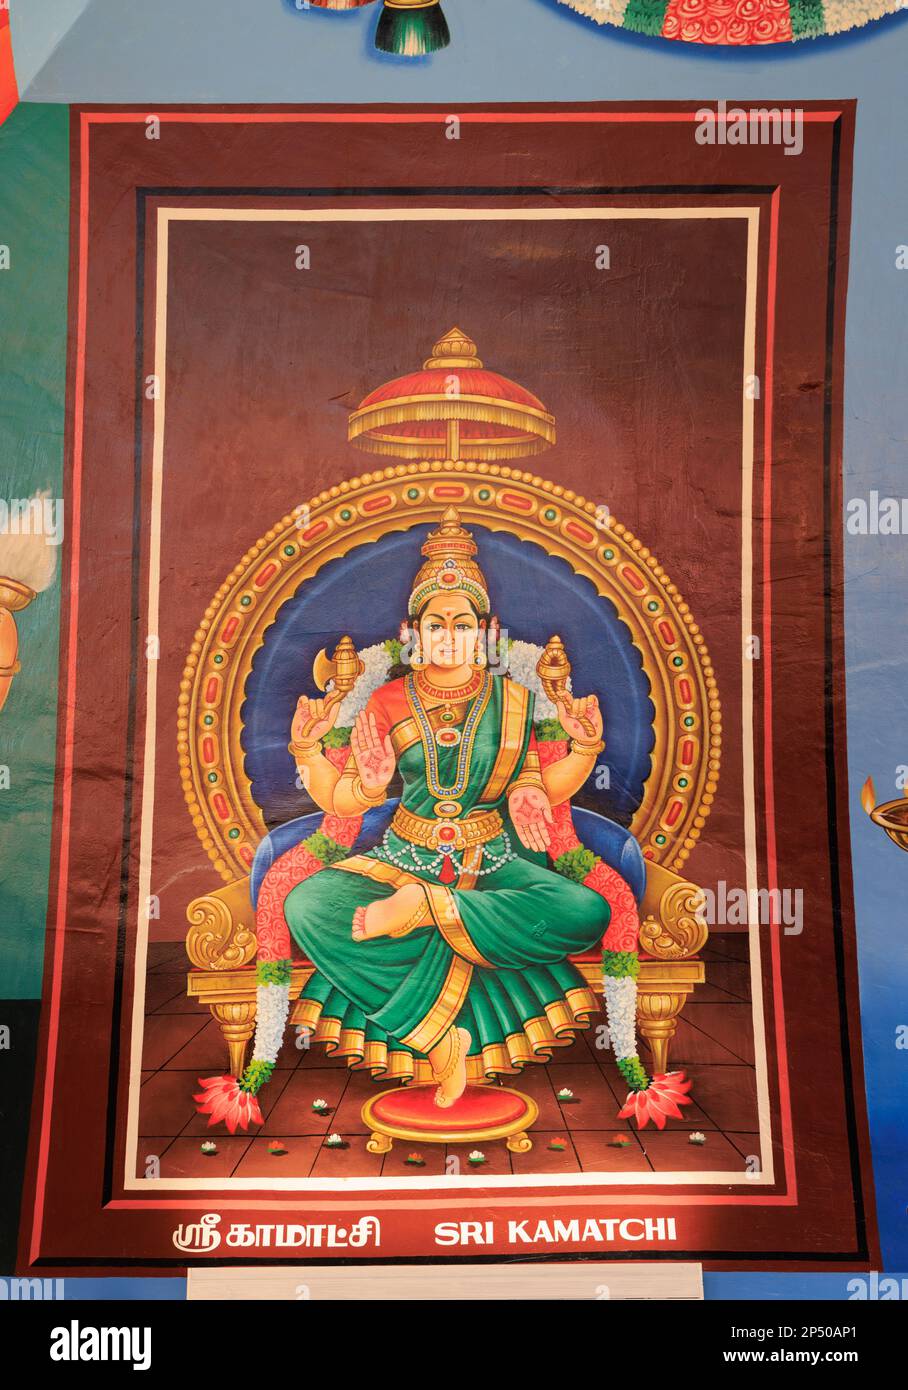 Ceiling painting in Sri Mariamman Temple, Singapore Stock Photo